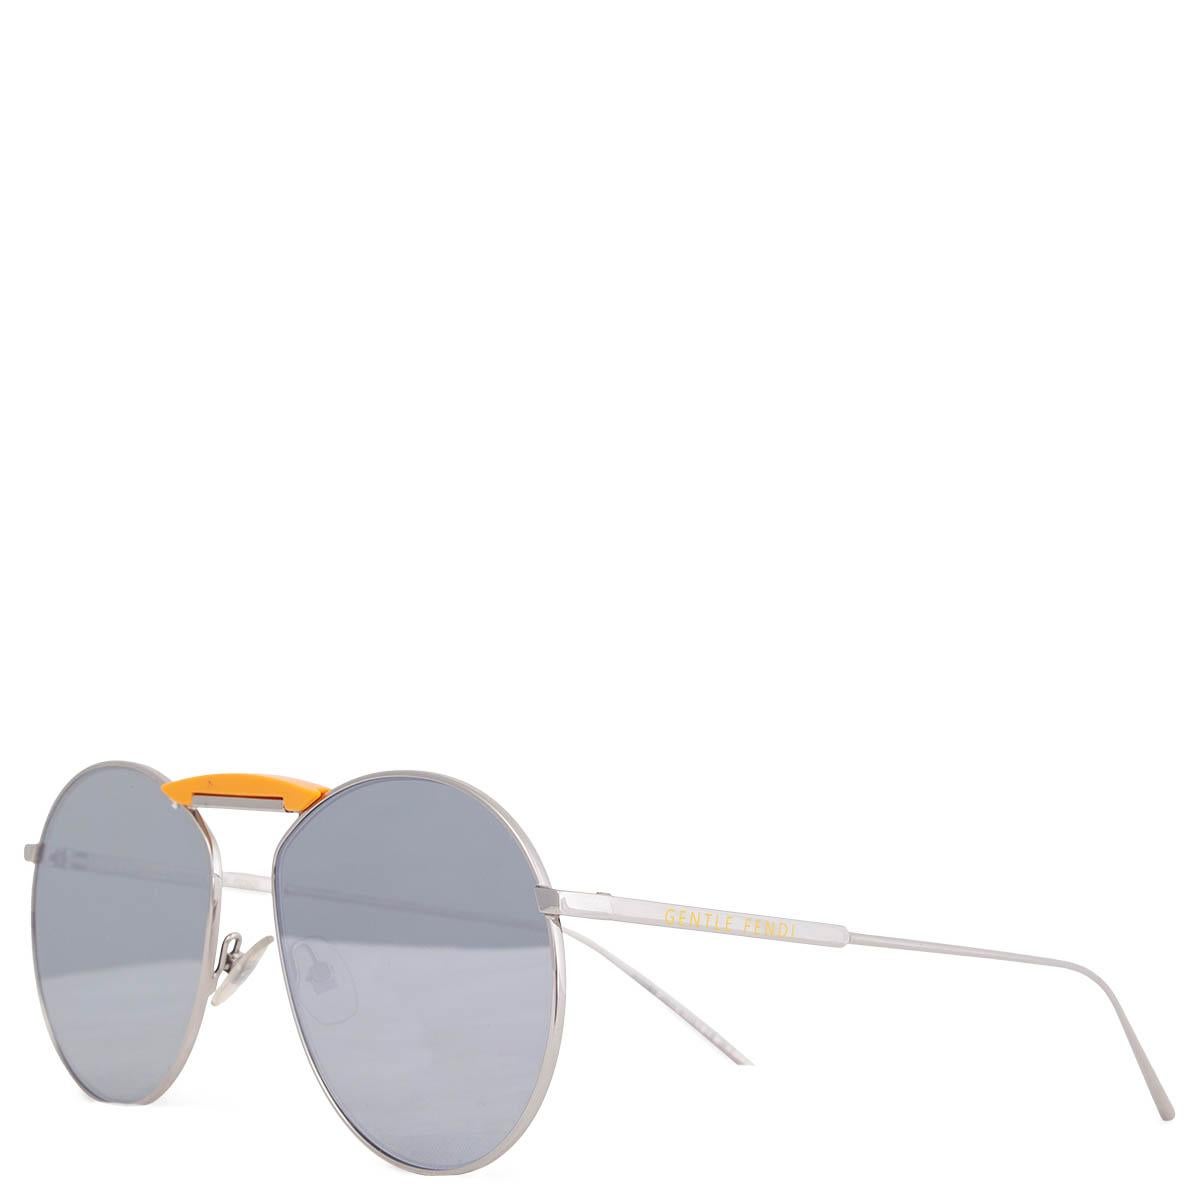 100% authentic Fendi x Gentle Monster silver-tone limited edition Gentle Fendi sunglasses in with mirrored lenses. Have been worn once and are in virtually new condition. Come with case. 

Measurements
Model	FF 0368/S
Width	14cm (5.5in)
Height	5.3cm